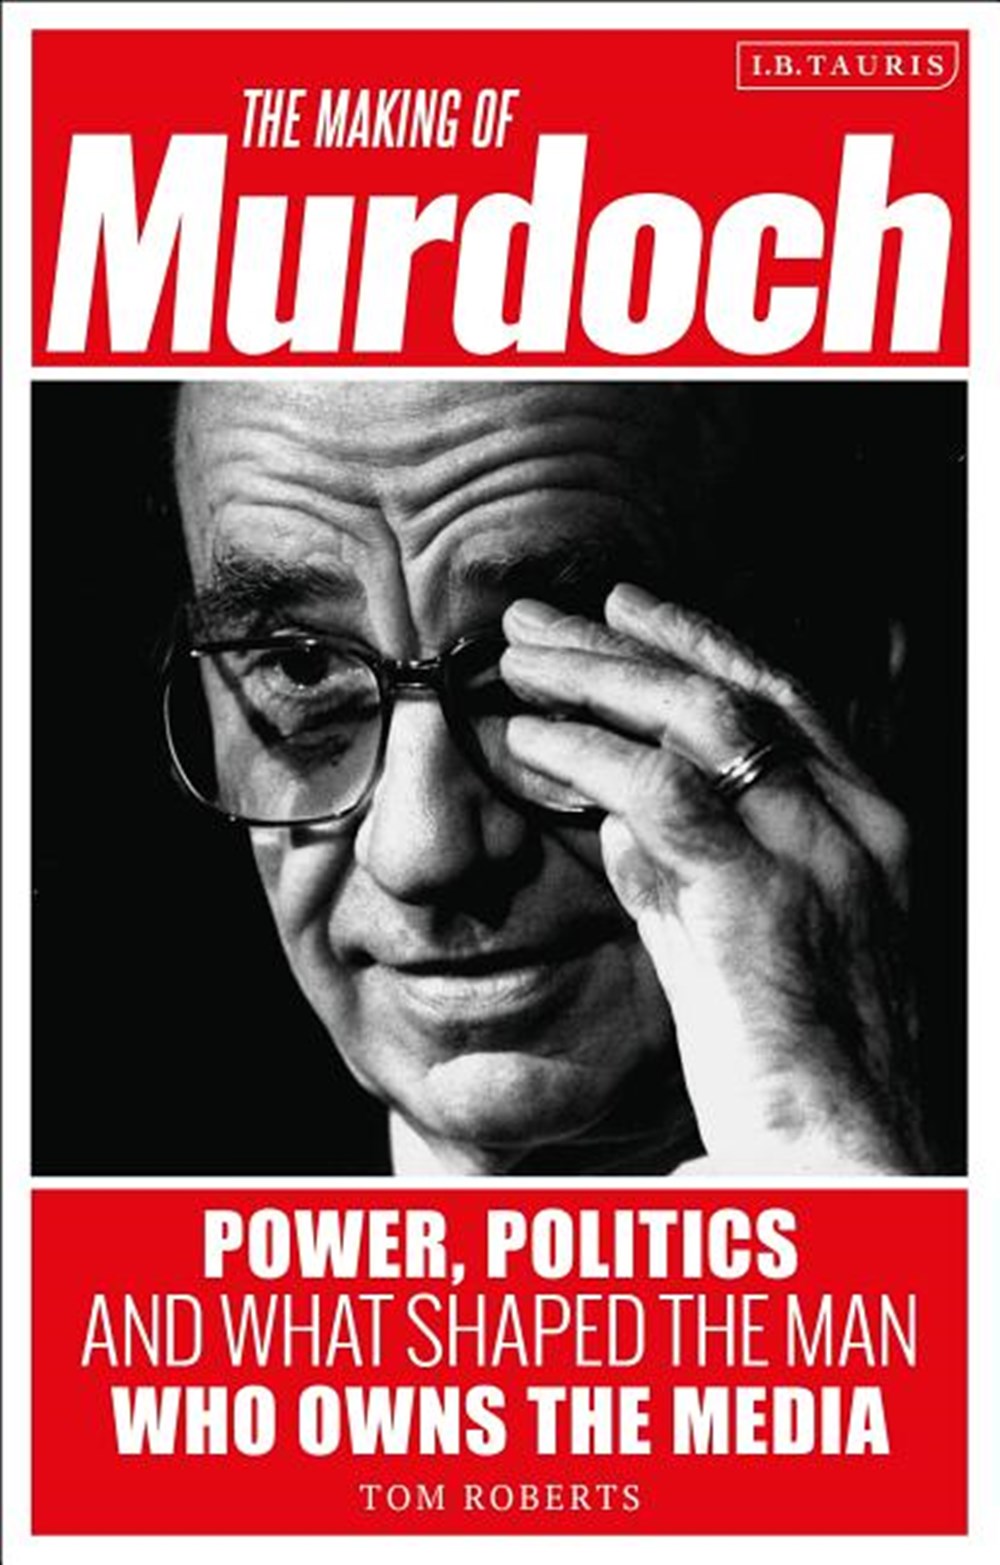 Making of Murdoch Power, Politics and What Shaped the Man Who Owns the Media